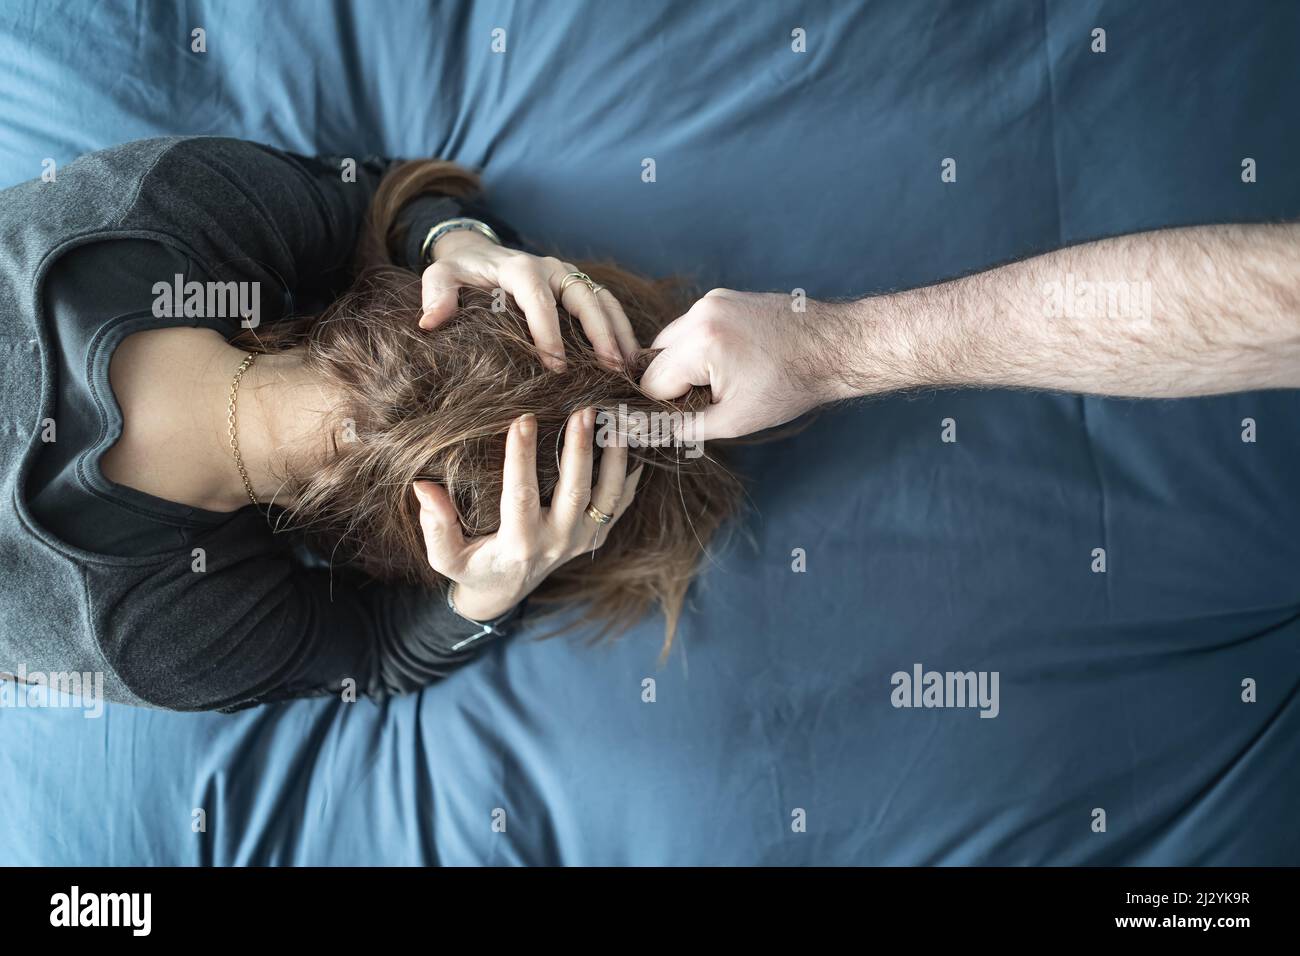 Man assaulting his wife in the home, scene of gender violence against women. Stock Photo